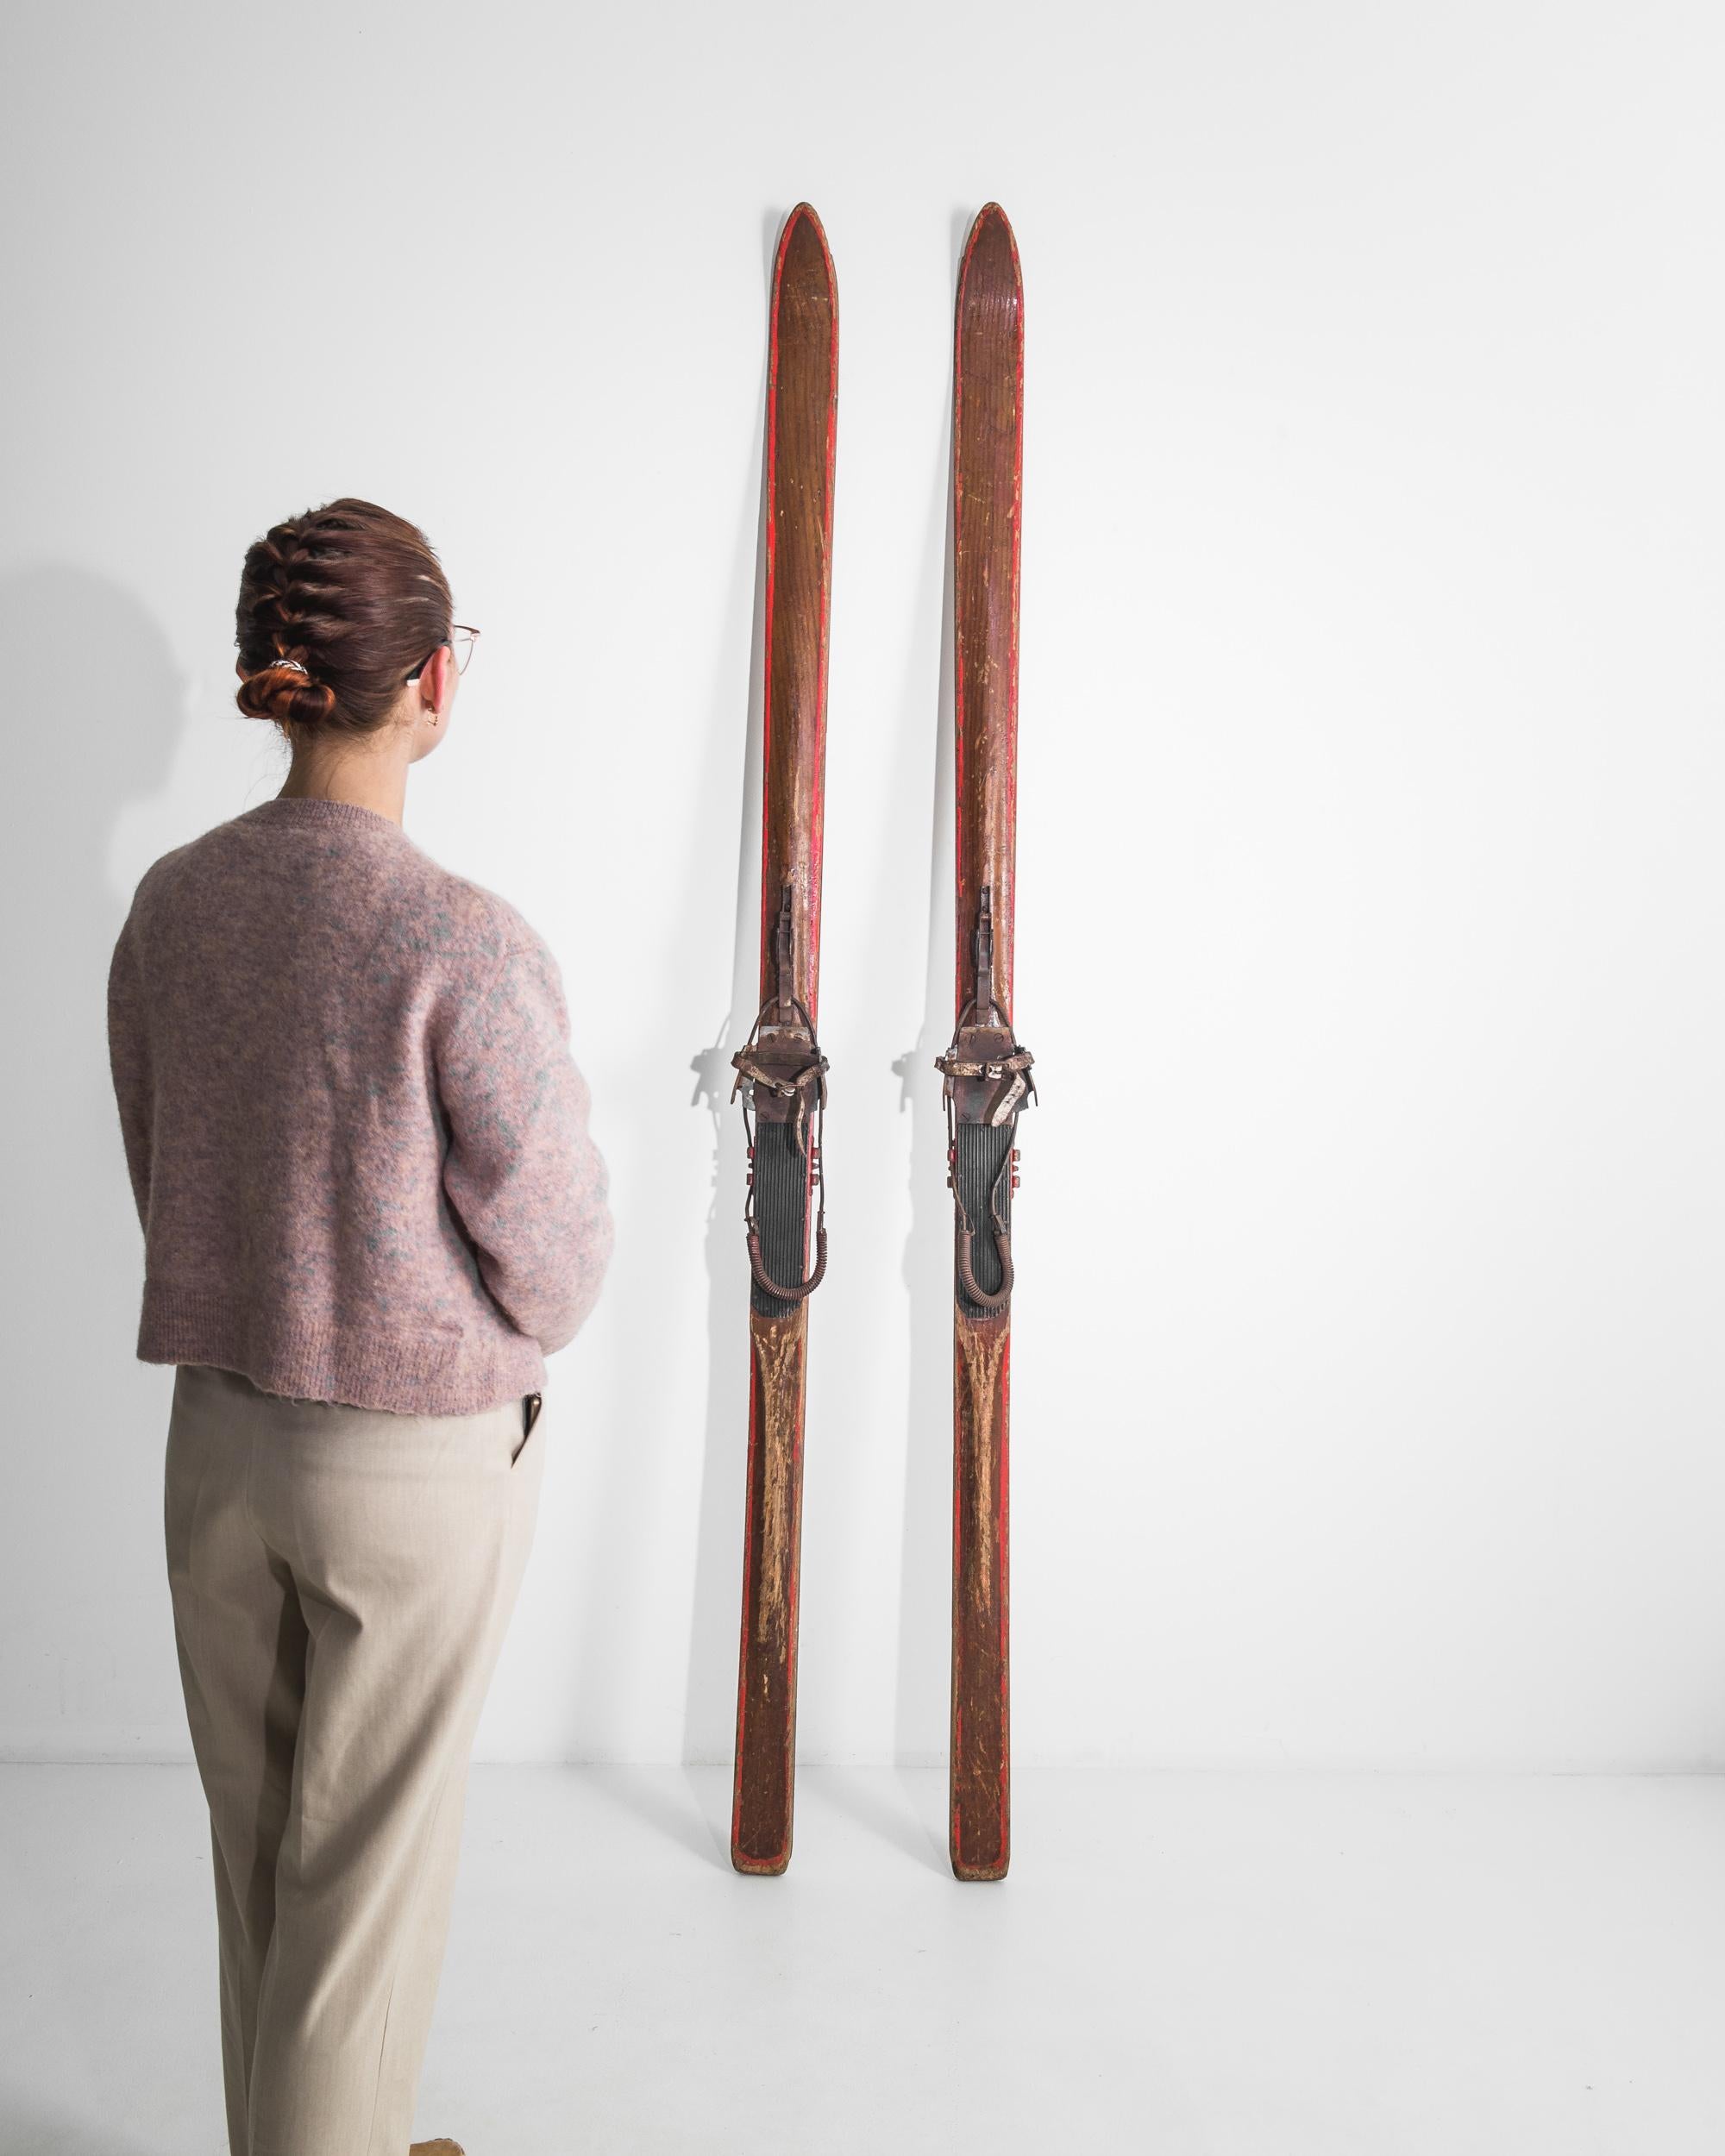 This pair of vintage skis evokes the majesty of winter in the Carpathian mountains. Made in Czechia in the 1950s, the long, slender design indicates that these skis would have been used for cross country skiing, an ancient mode of transport which